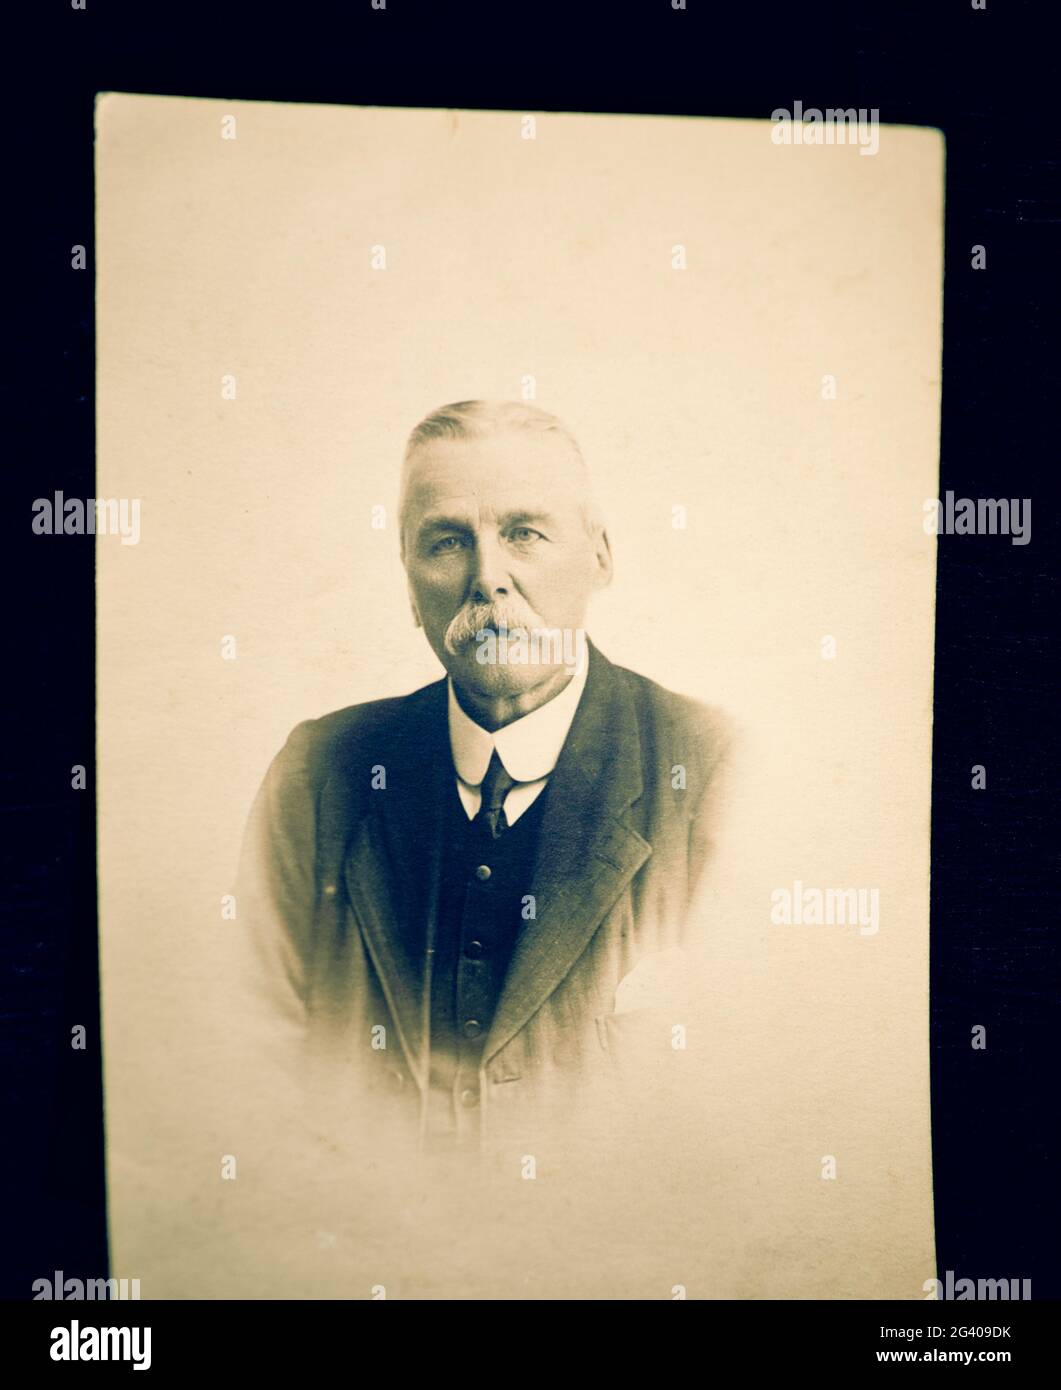 Authentic vintage photograph portrait of senior man with serious expression and moustache. Concept of nostalgia, historical, early 20th century Stock Photo